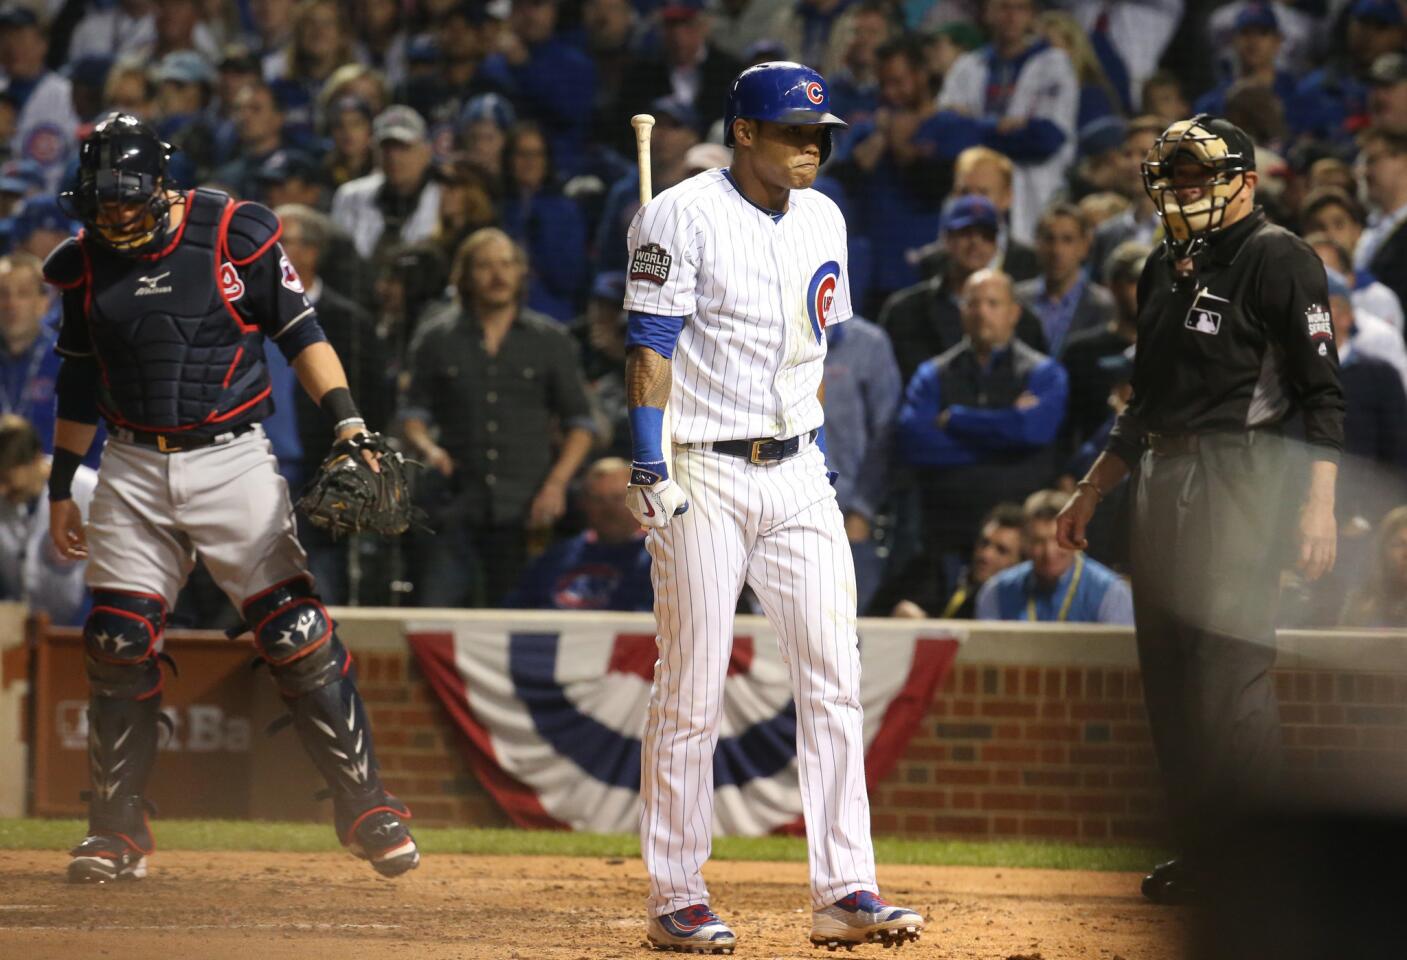 World Series Game 3: Indians 1, Cubs 0